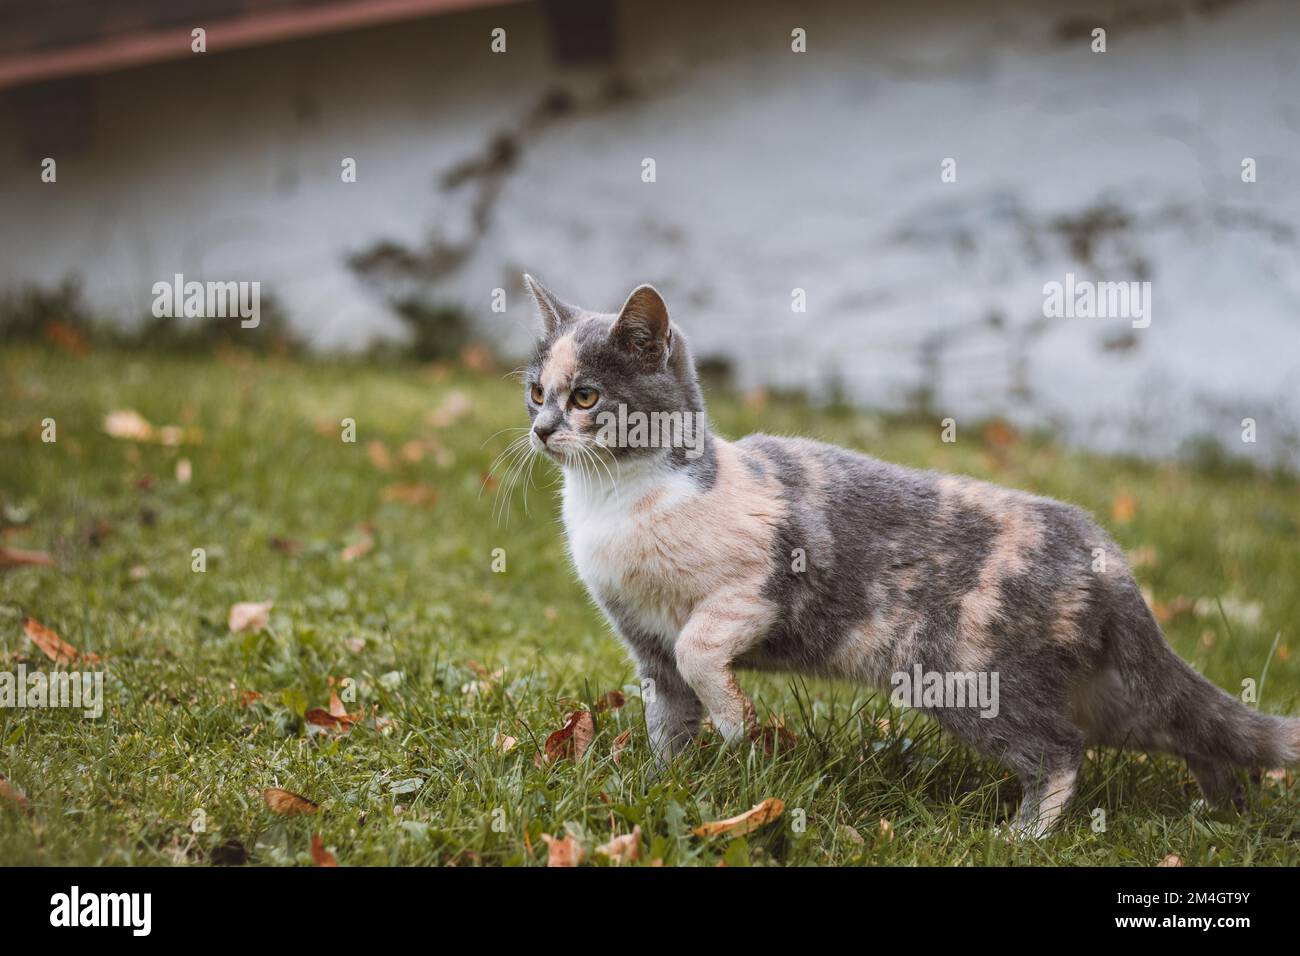 Curious colourful kitten sitting in the grass watching her siblings frolic around her. A beloved four-legged pet in the wild. Cat at attention. Stock Photo